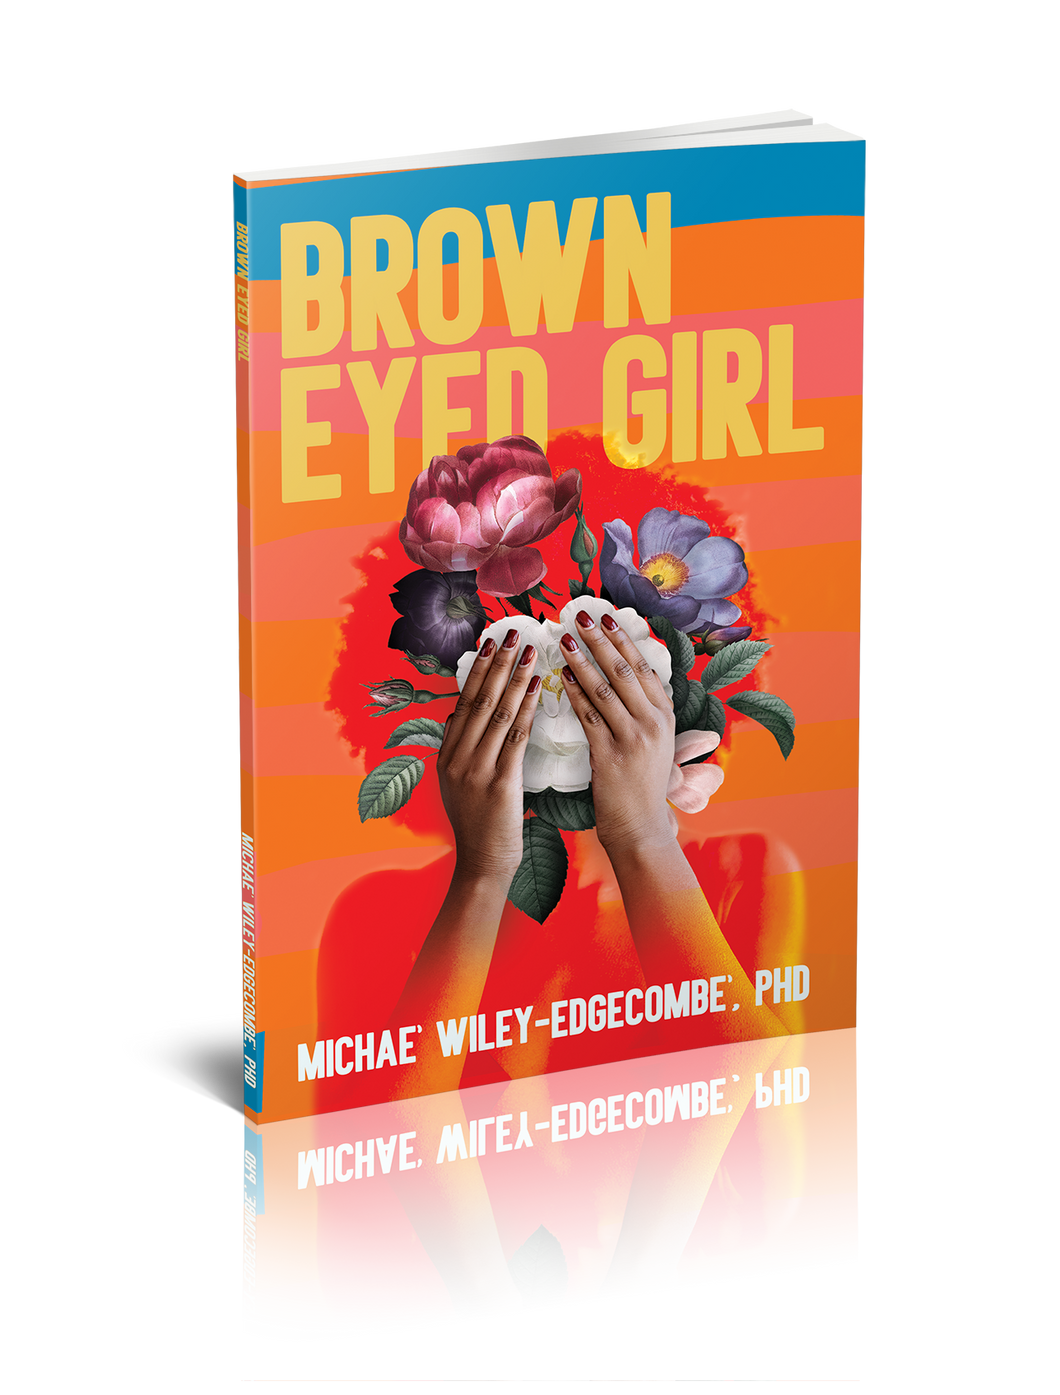 Brown Eyed Girl - Michae' Wiley-Edgecombe